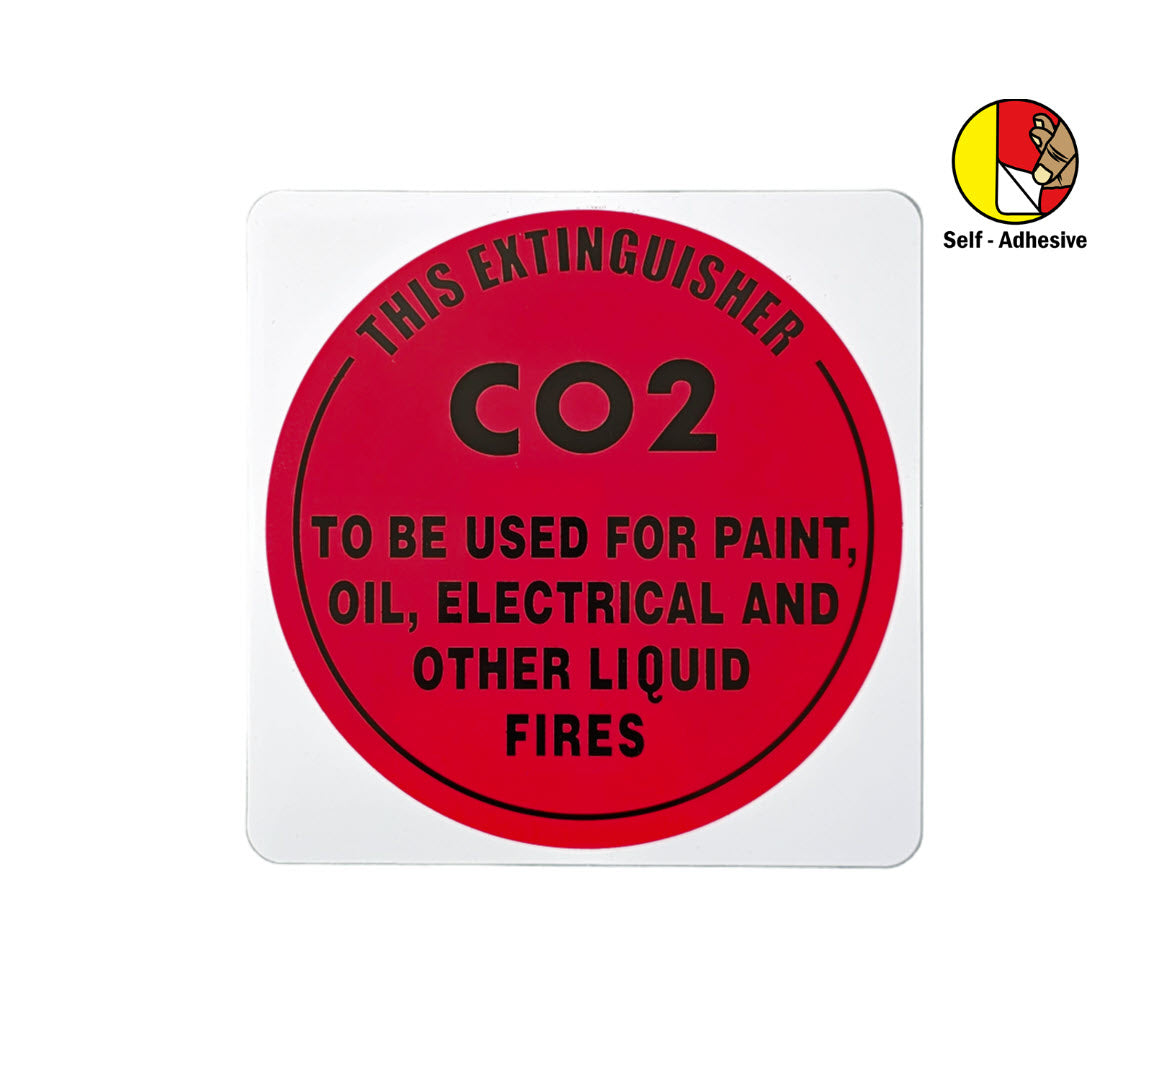 Self-adhesive CO2 Extinguisher I.D Sign - Premium Signage & Stickers from Firebox - Shop now at Firebox Australia